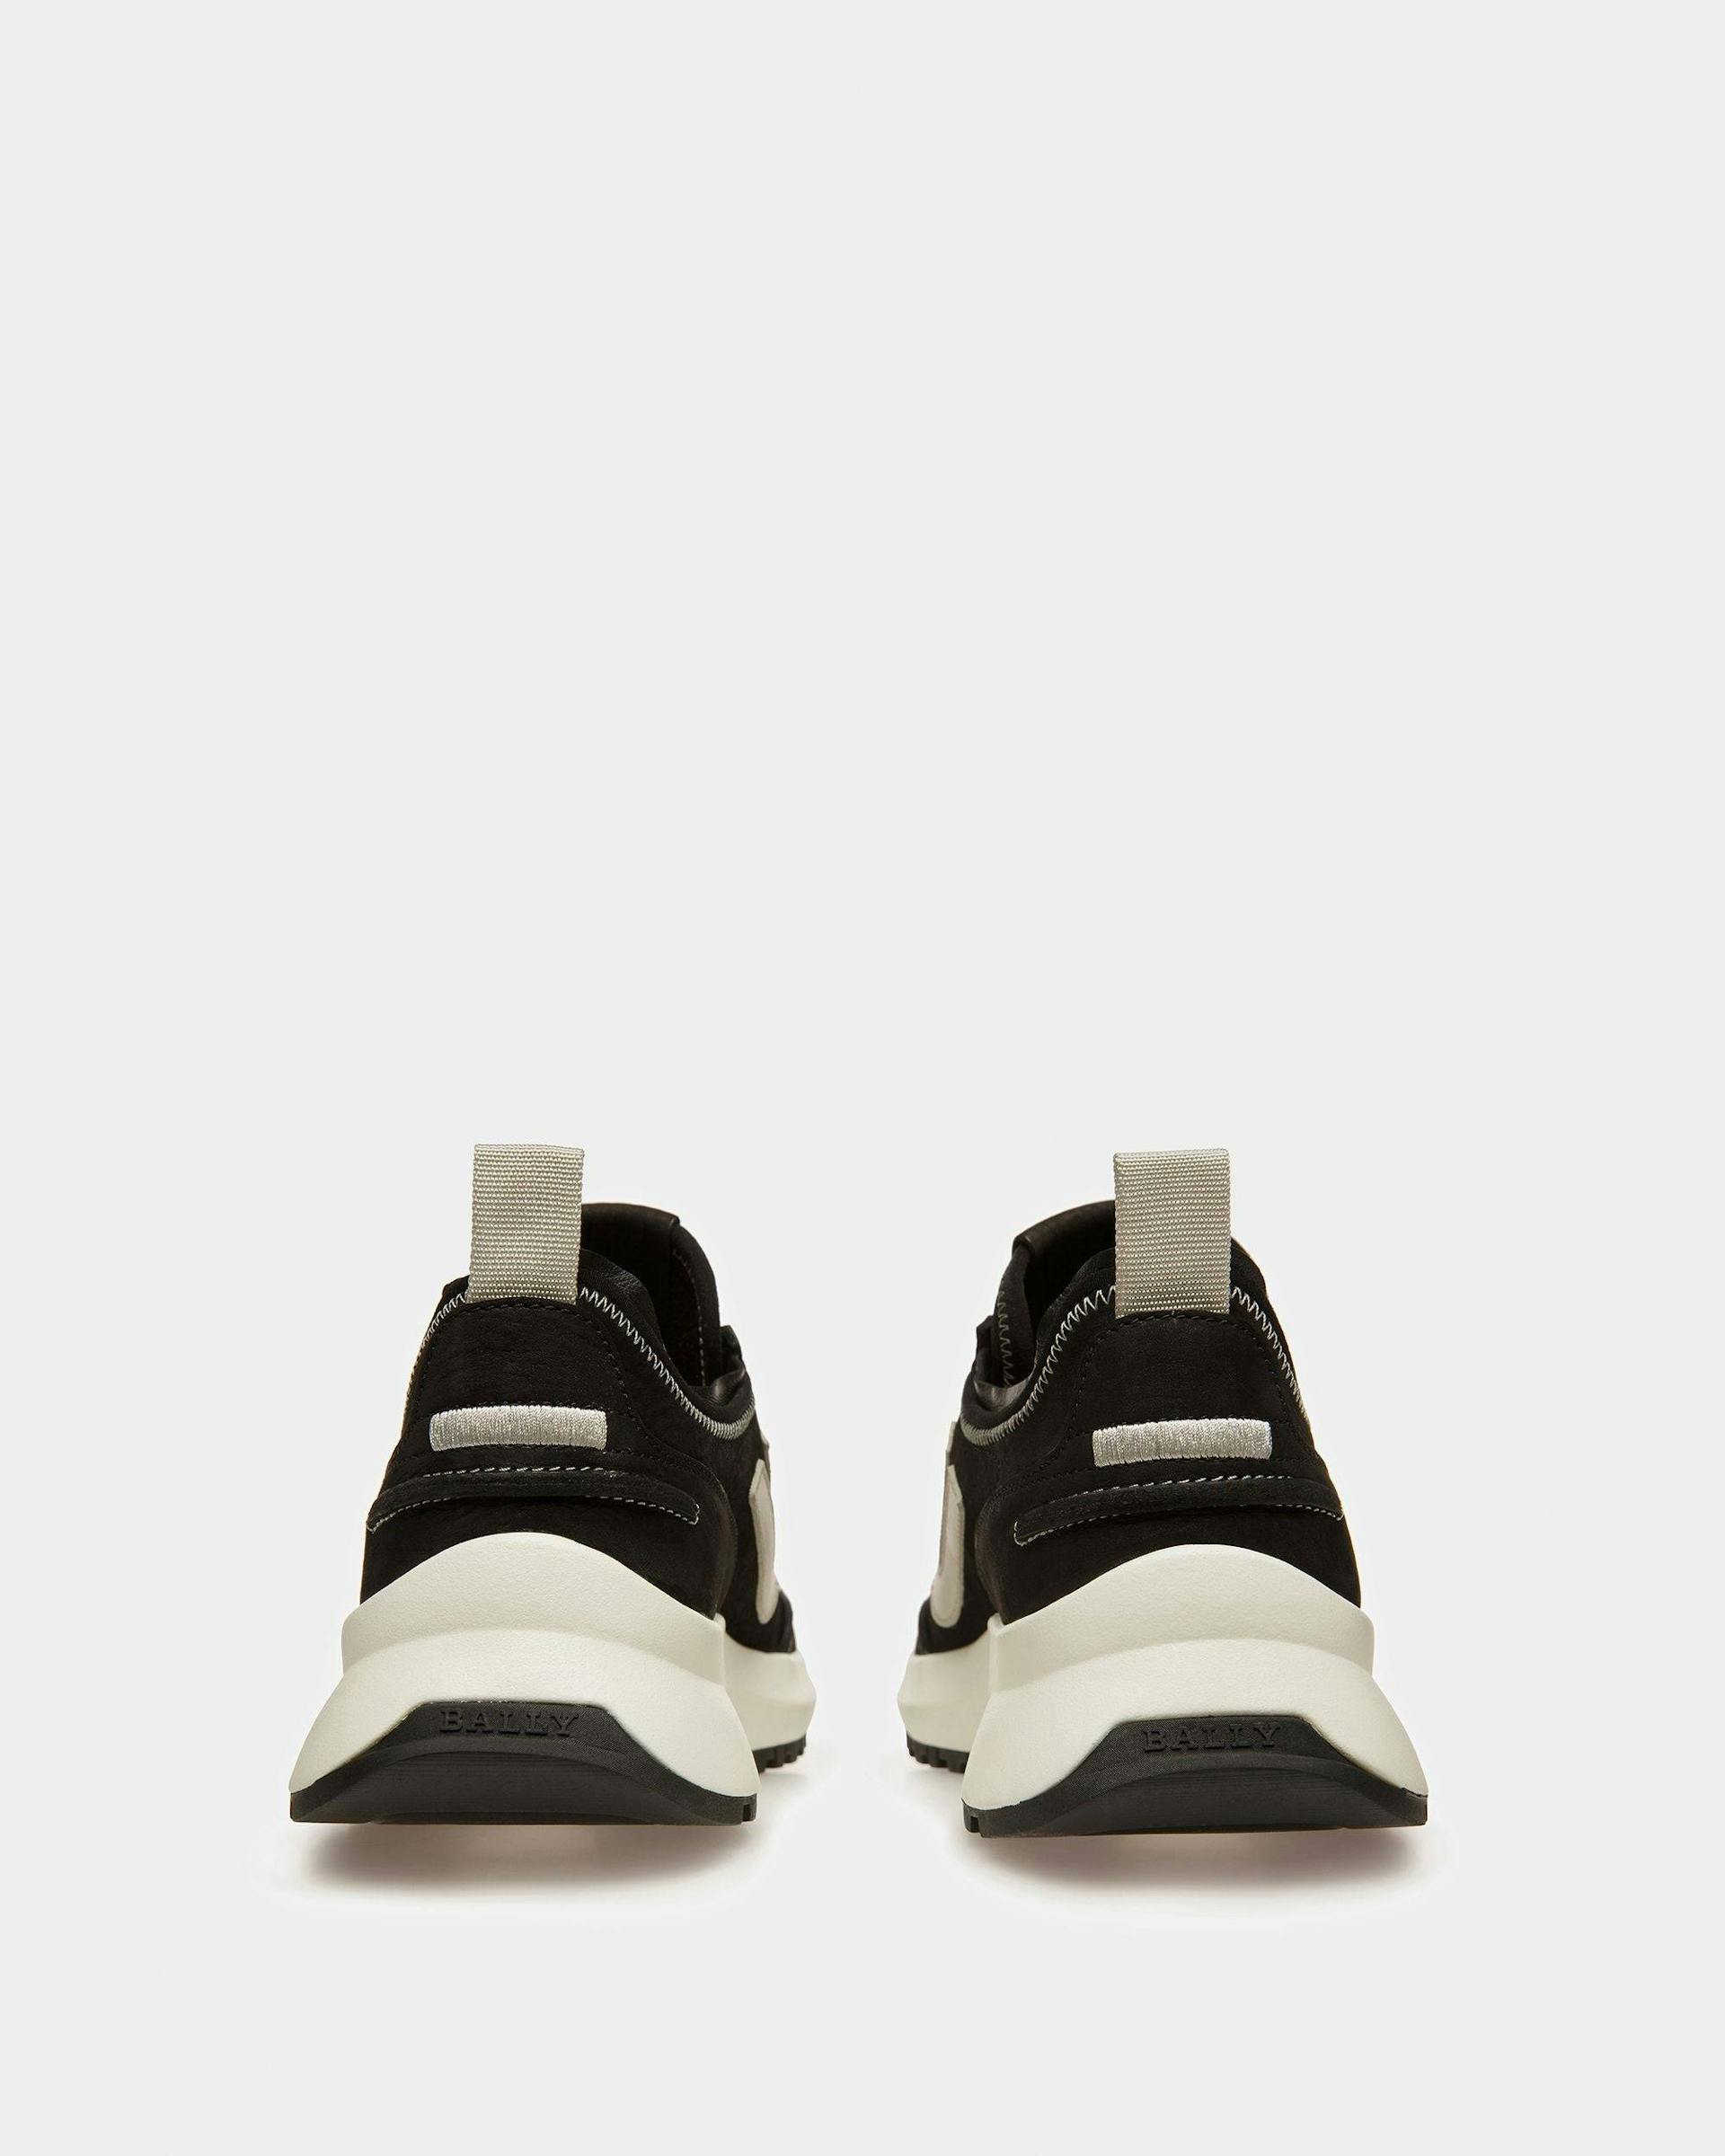 Darys Leather Sneakers In Black And Dusty White - Men's - Bally - 03